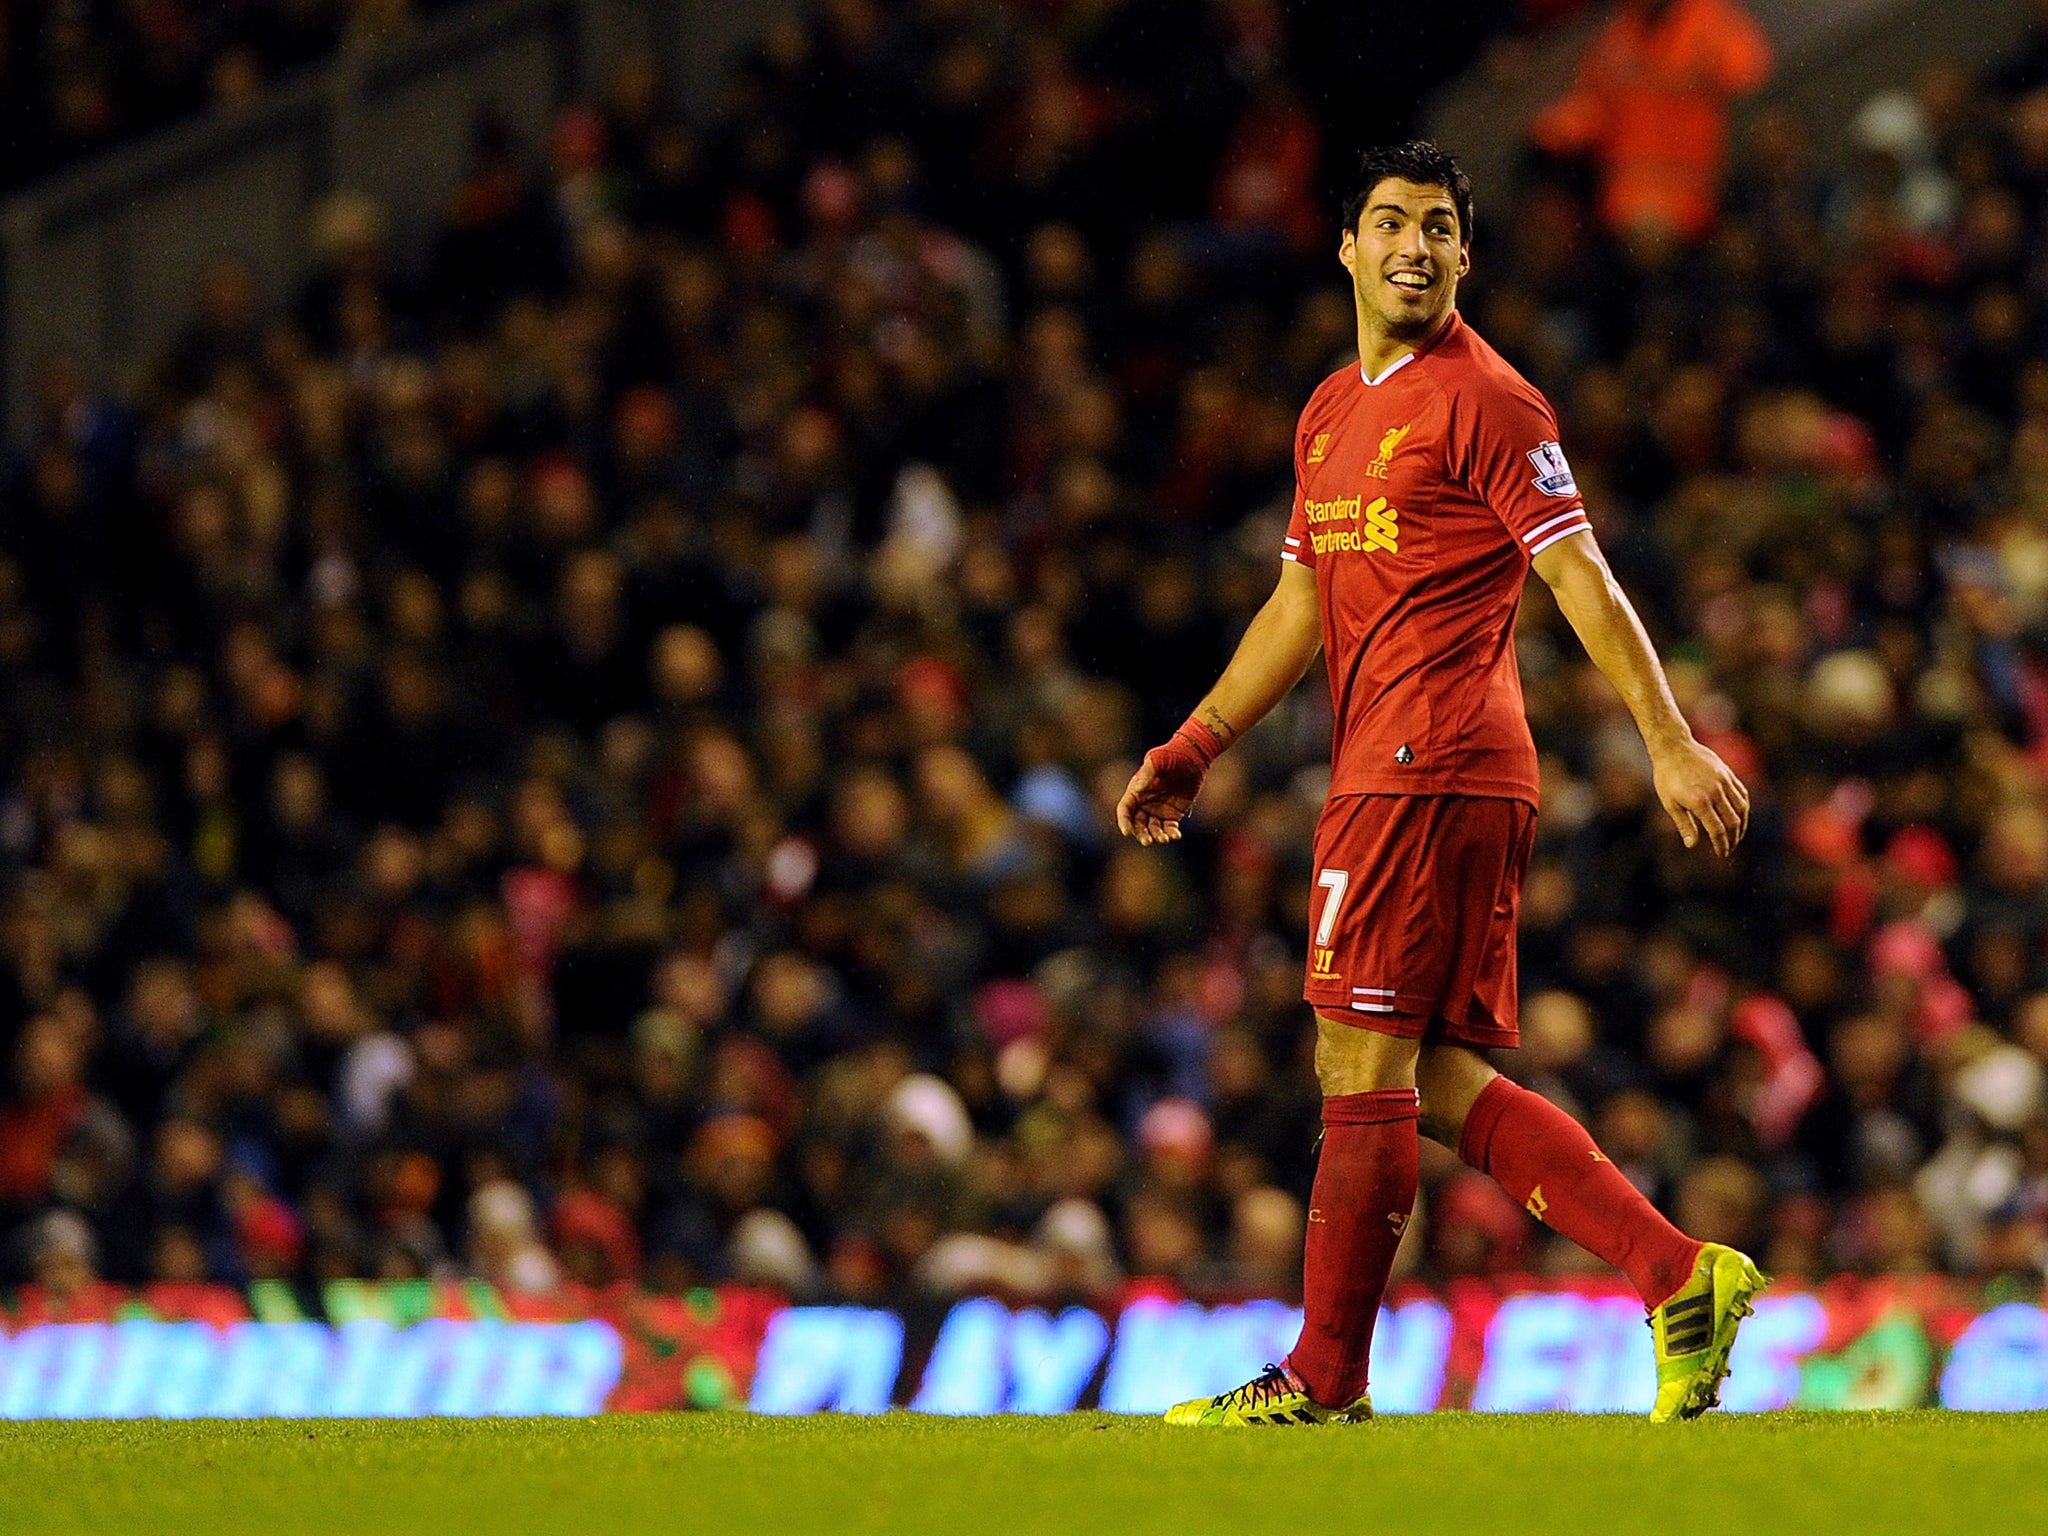 Liverpool striker Luis Suarez has been identified as the key threat by Oldham Athletic manager Lee Johnson